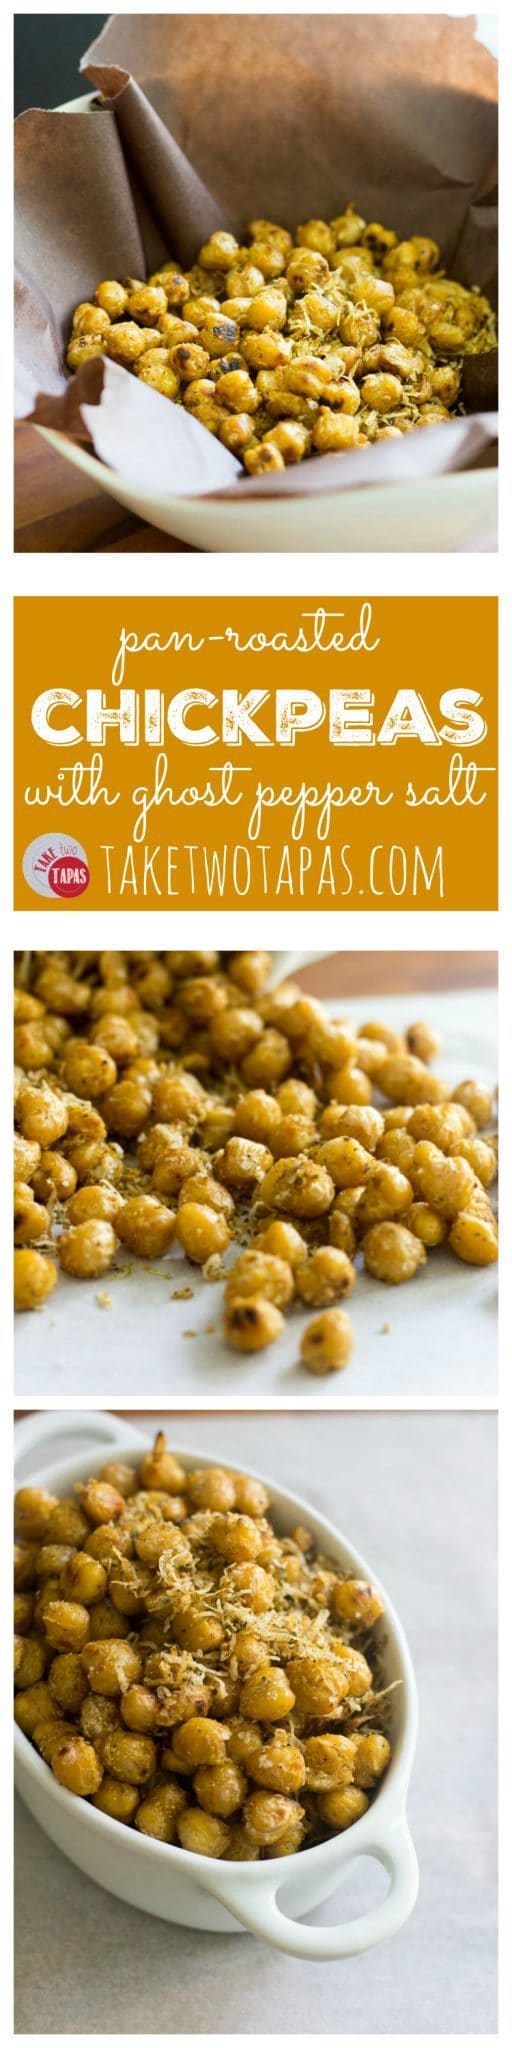 Pinterest collage image with text "pan roasted chickpeas with ghost pepper salt"